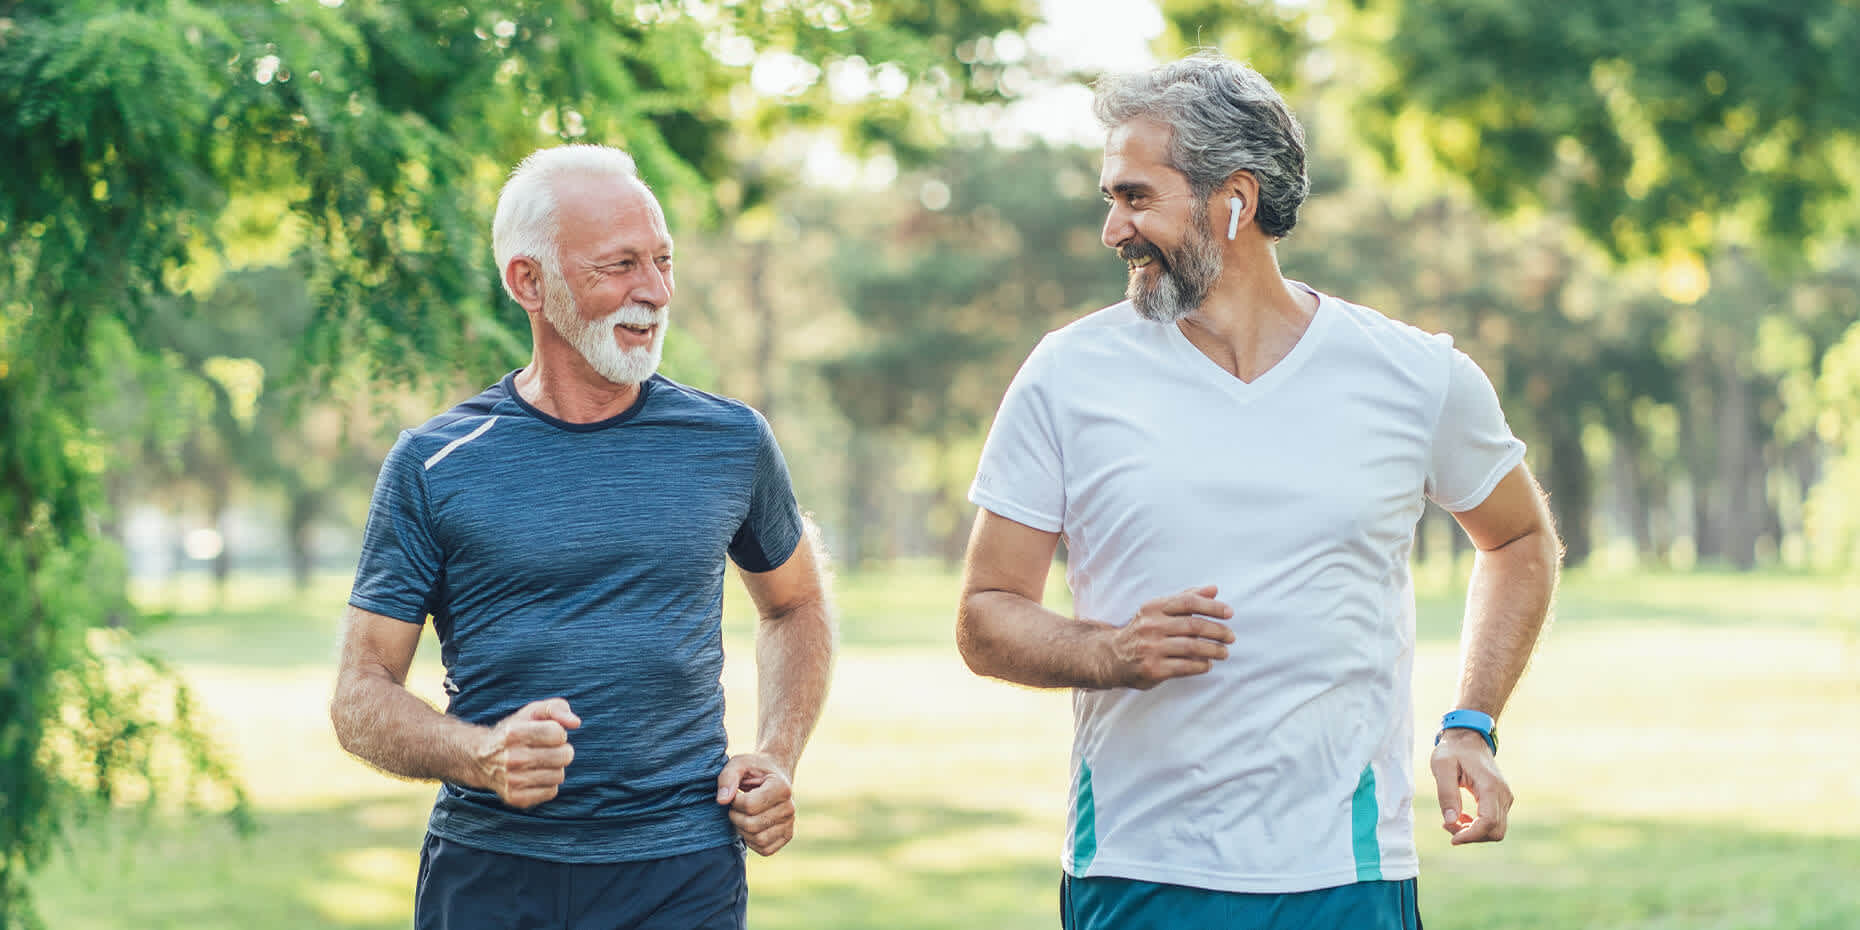 Two men jogging while discussing how testosterone levels impact metabolism